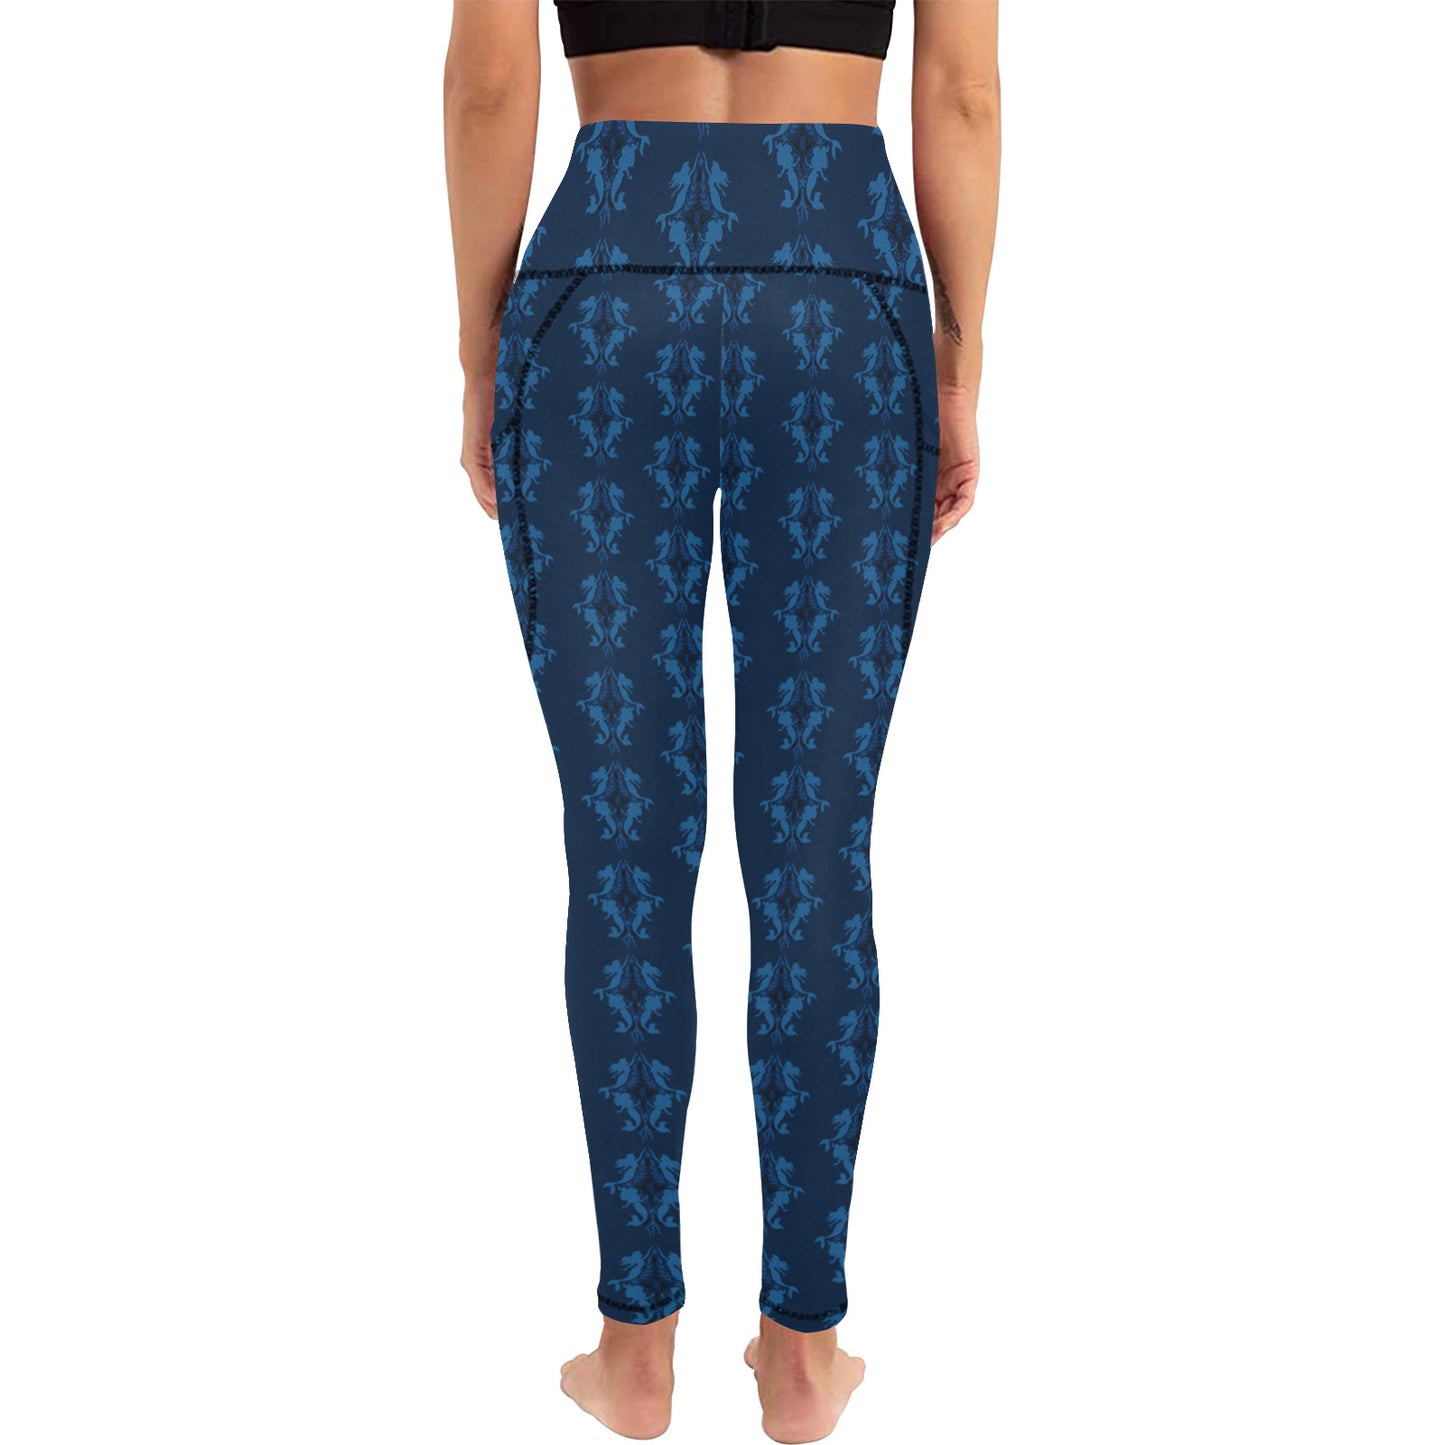 Under The Sea Women's Athletic Leggings With Pockets